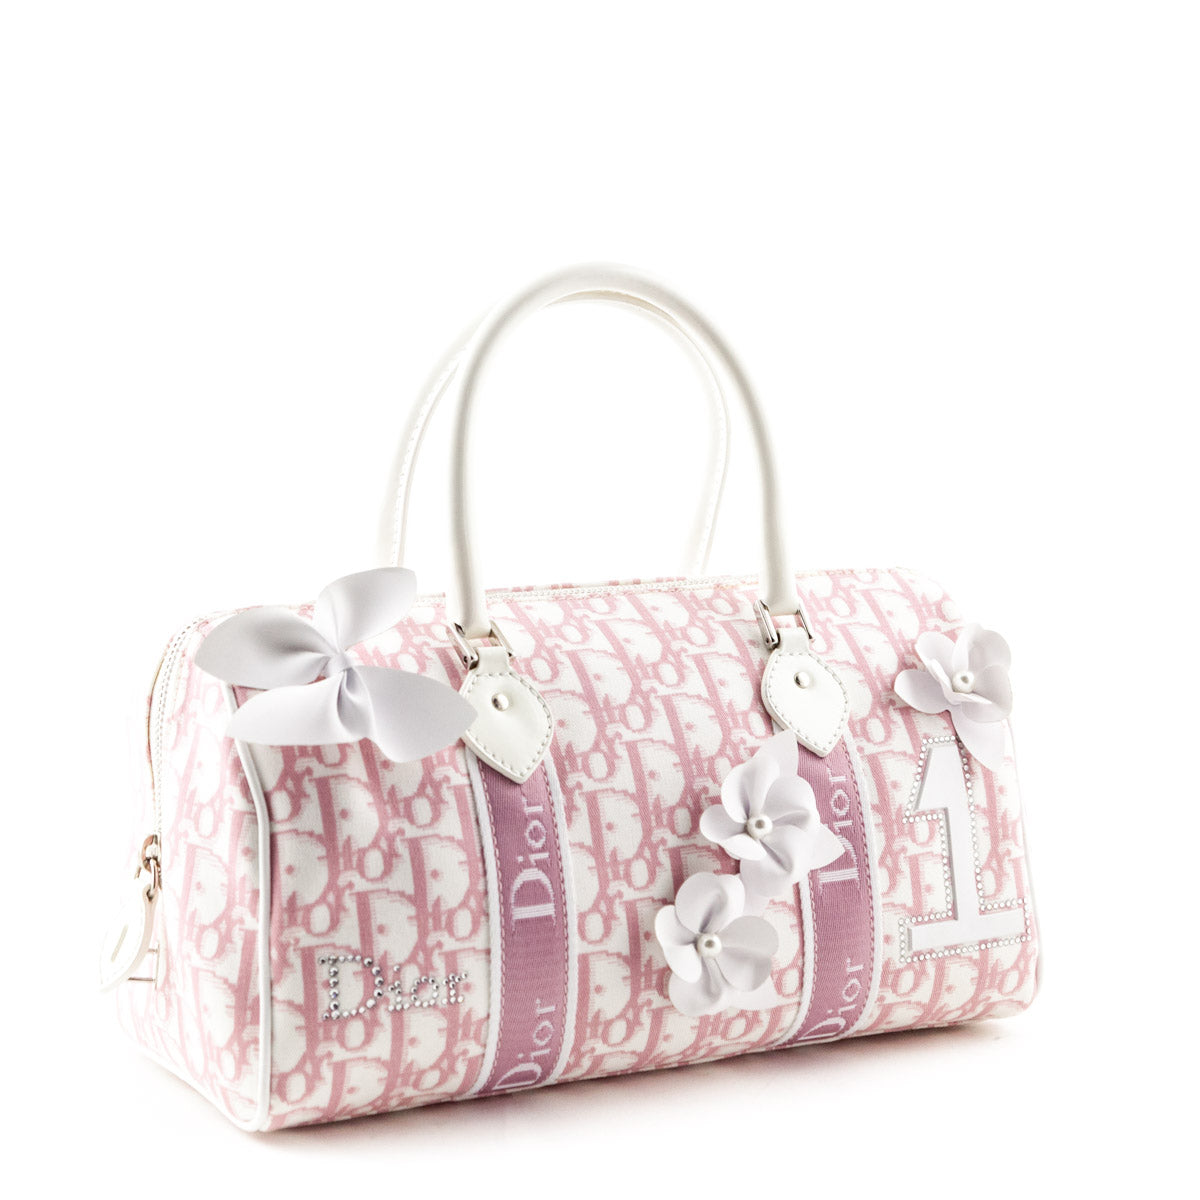 Dior Pink Diorissimo Canvas Boston Girly Flower Tote - Dior Bags